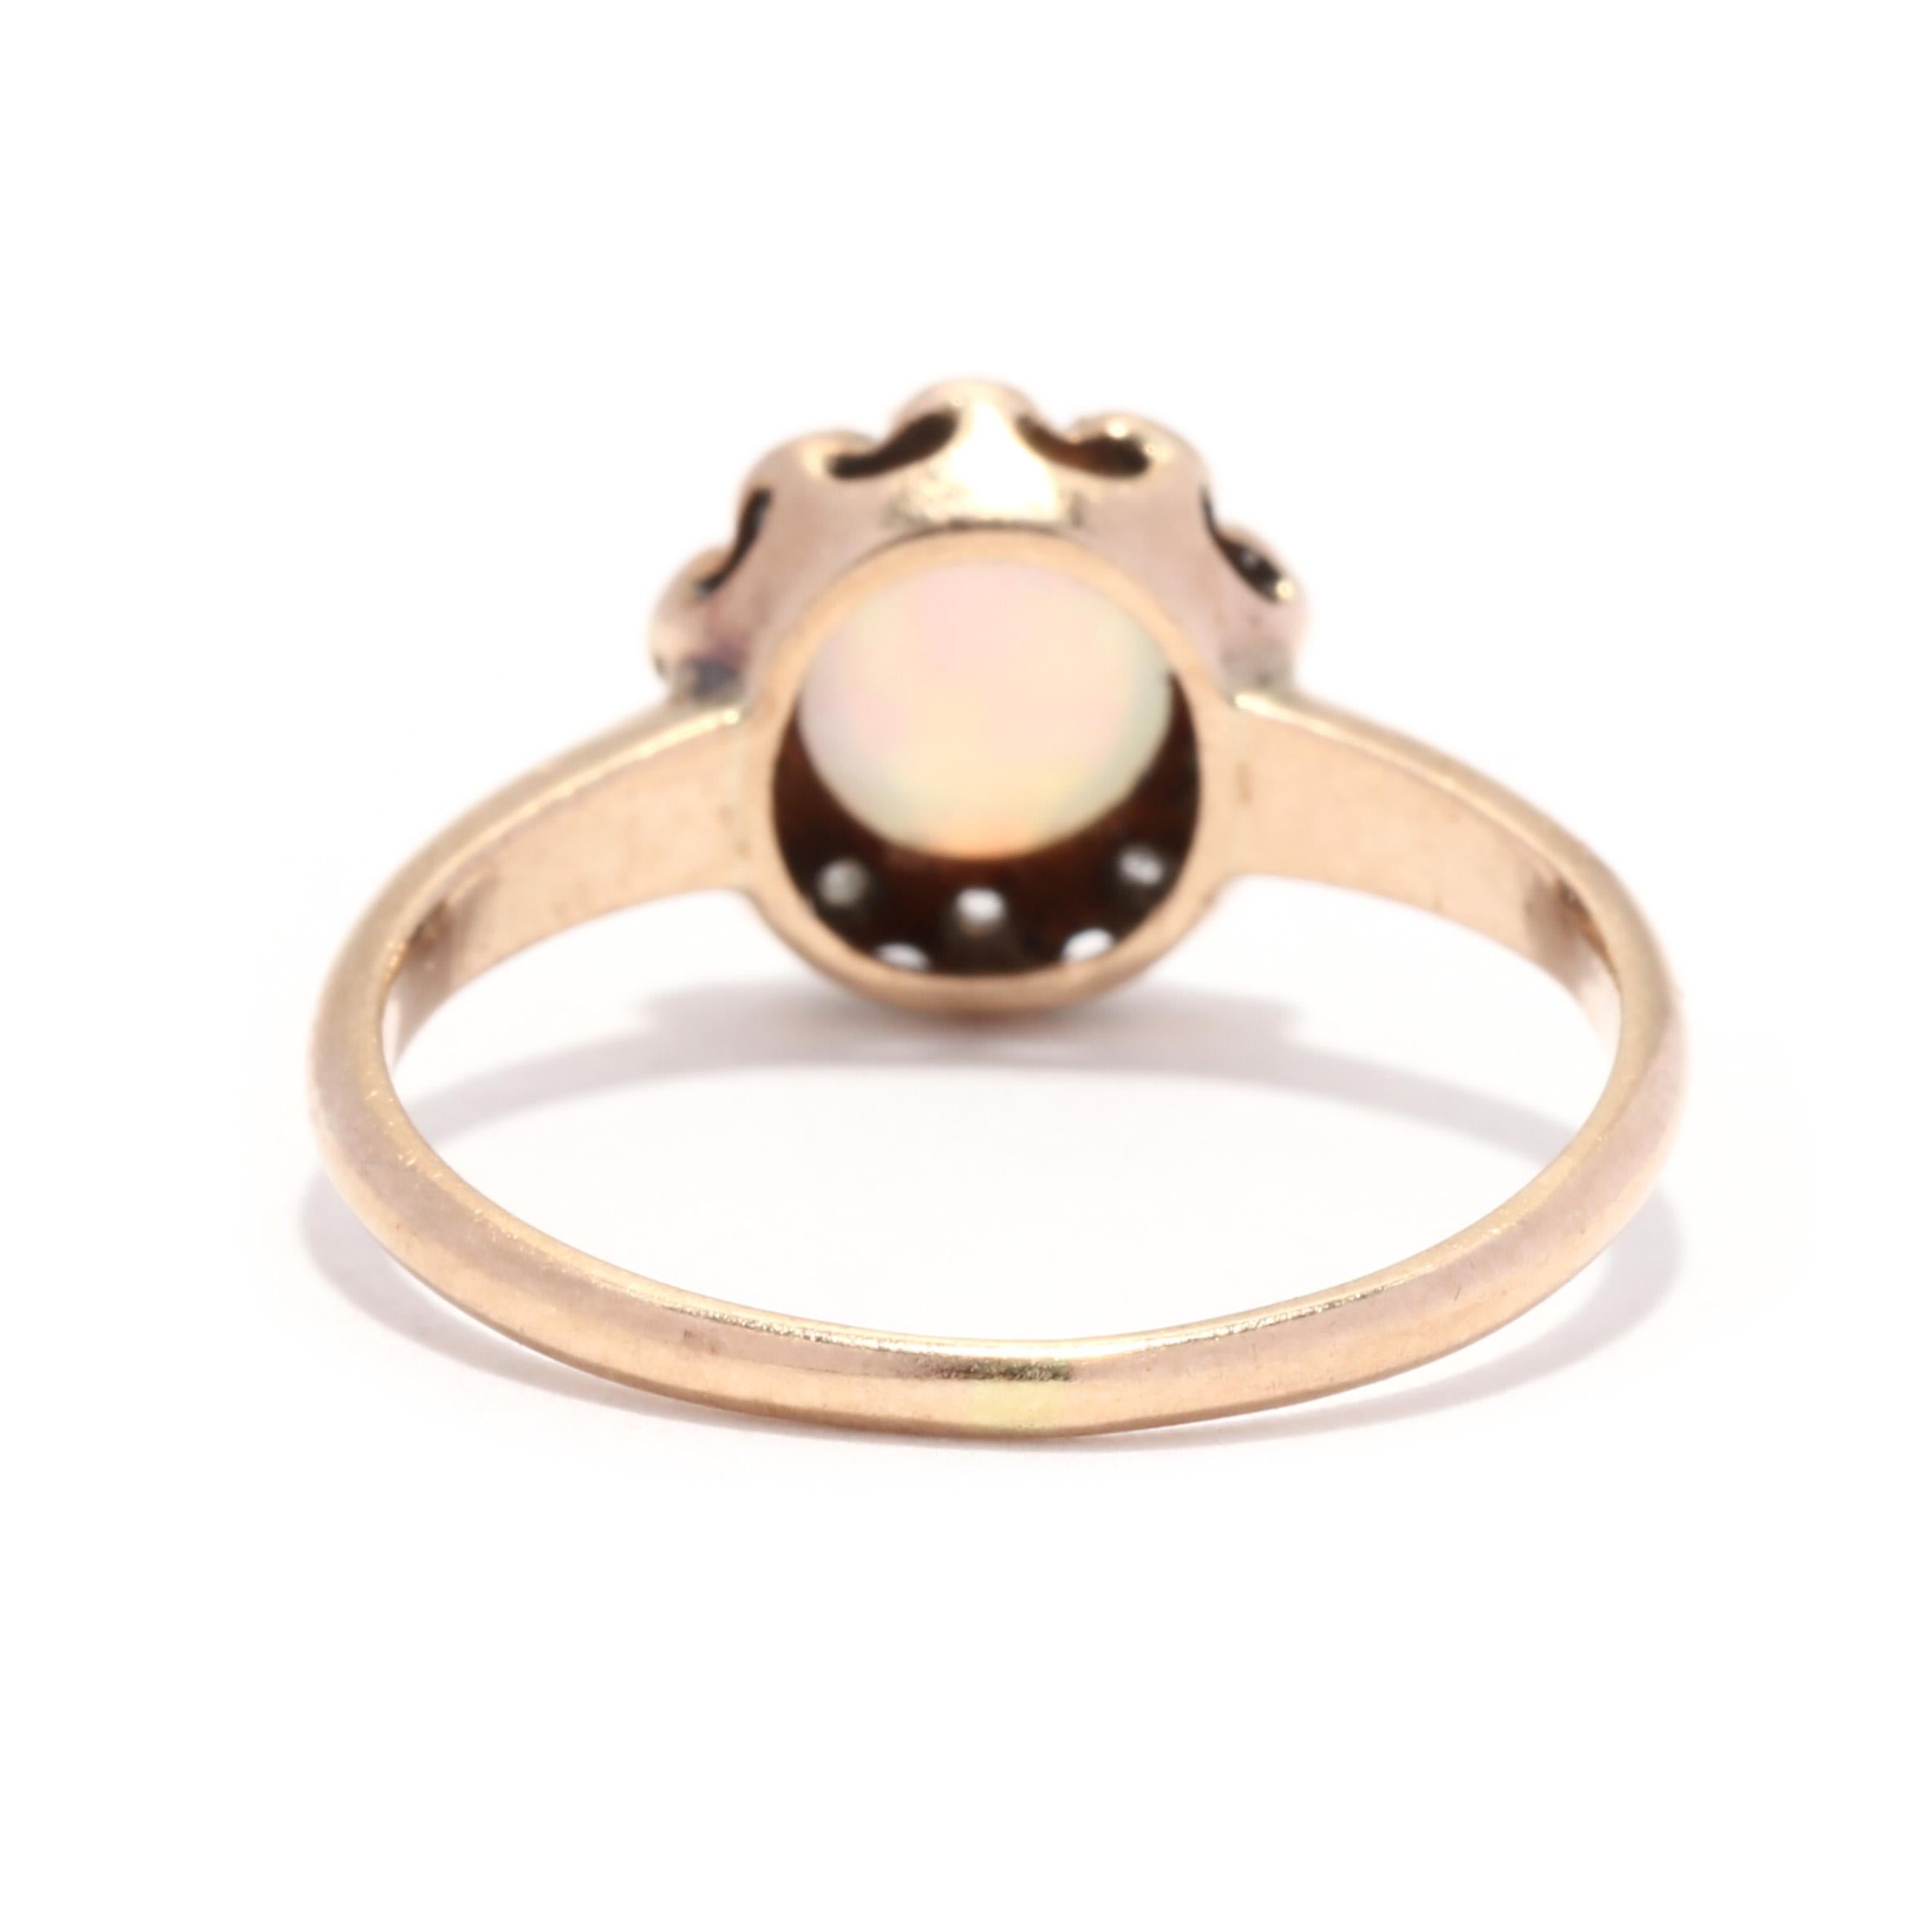 A Victorian 10 karat yellow gold opal and diamond ring. This antique ring features a round cabochon opal weighing approximately .27 carat surrounded by a single and old rose cut diamond halo weighing approximately .04 total carats and with a tapered